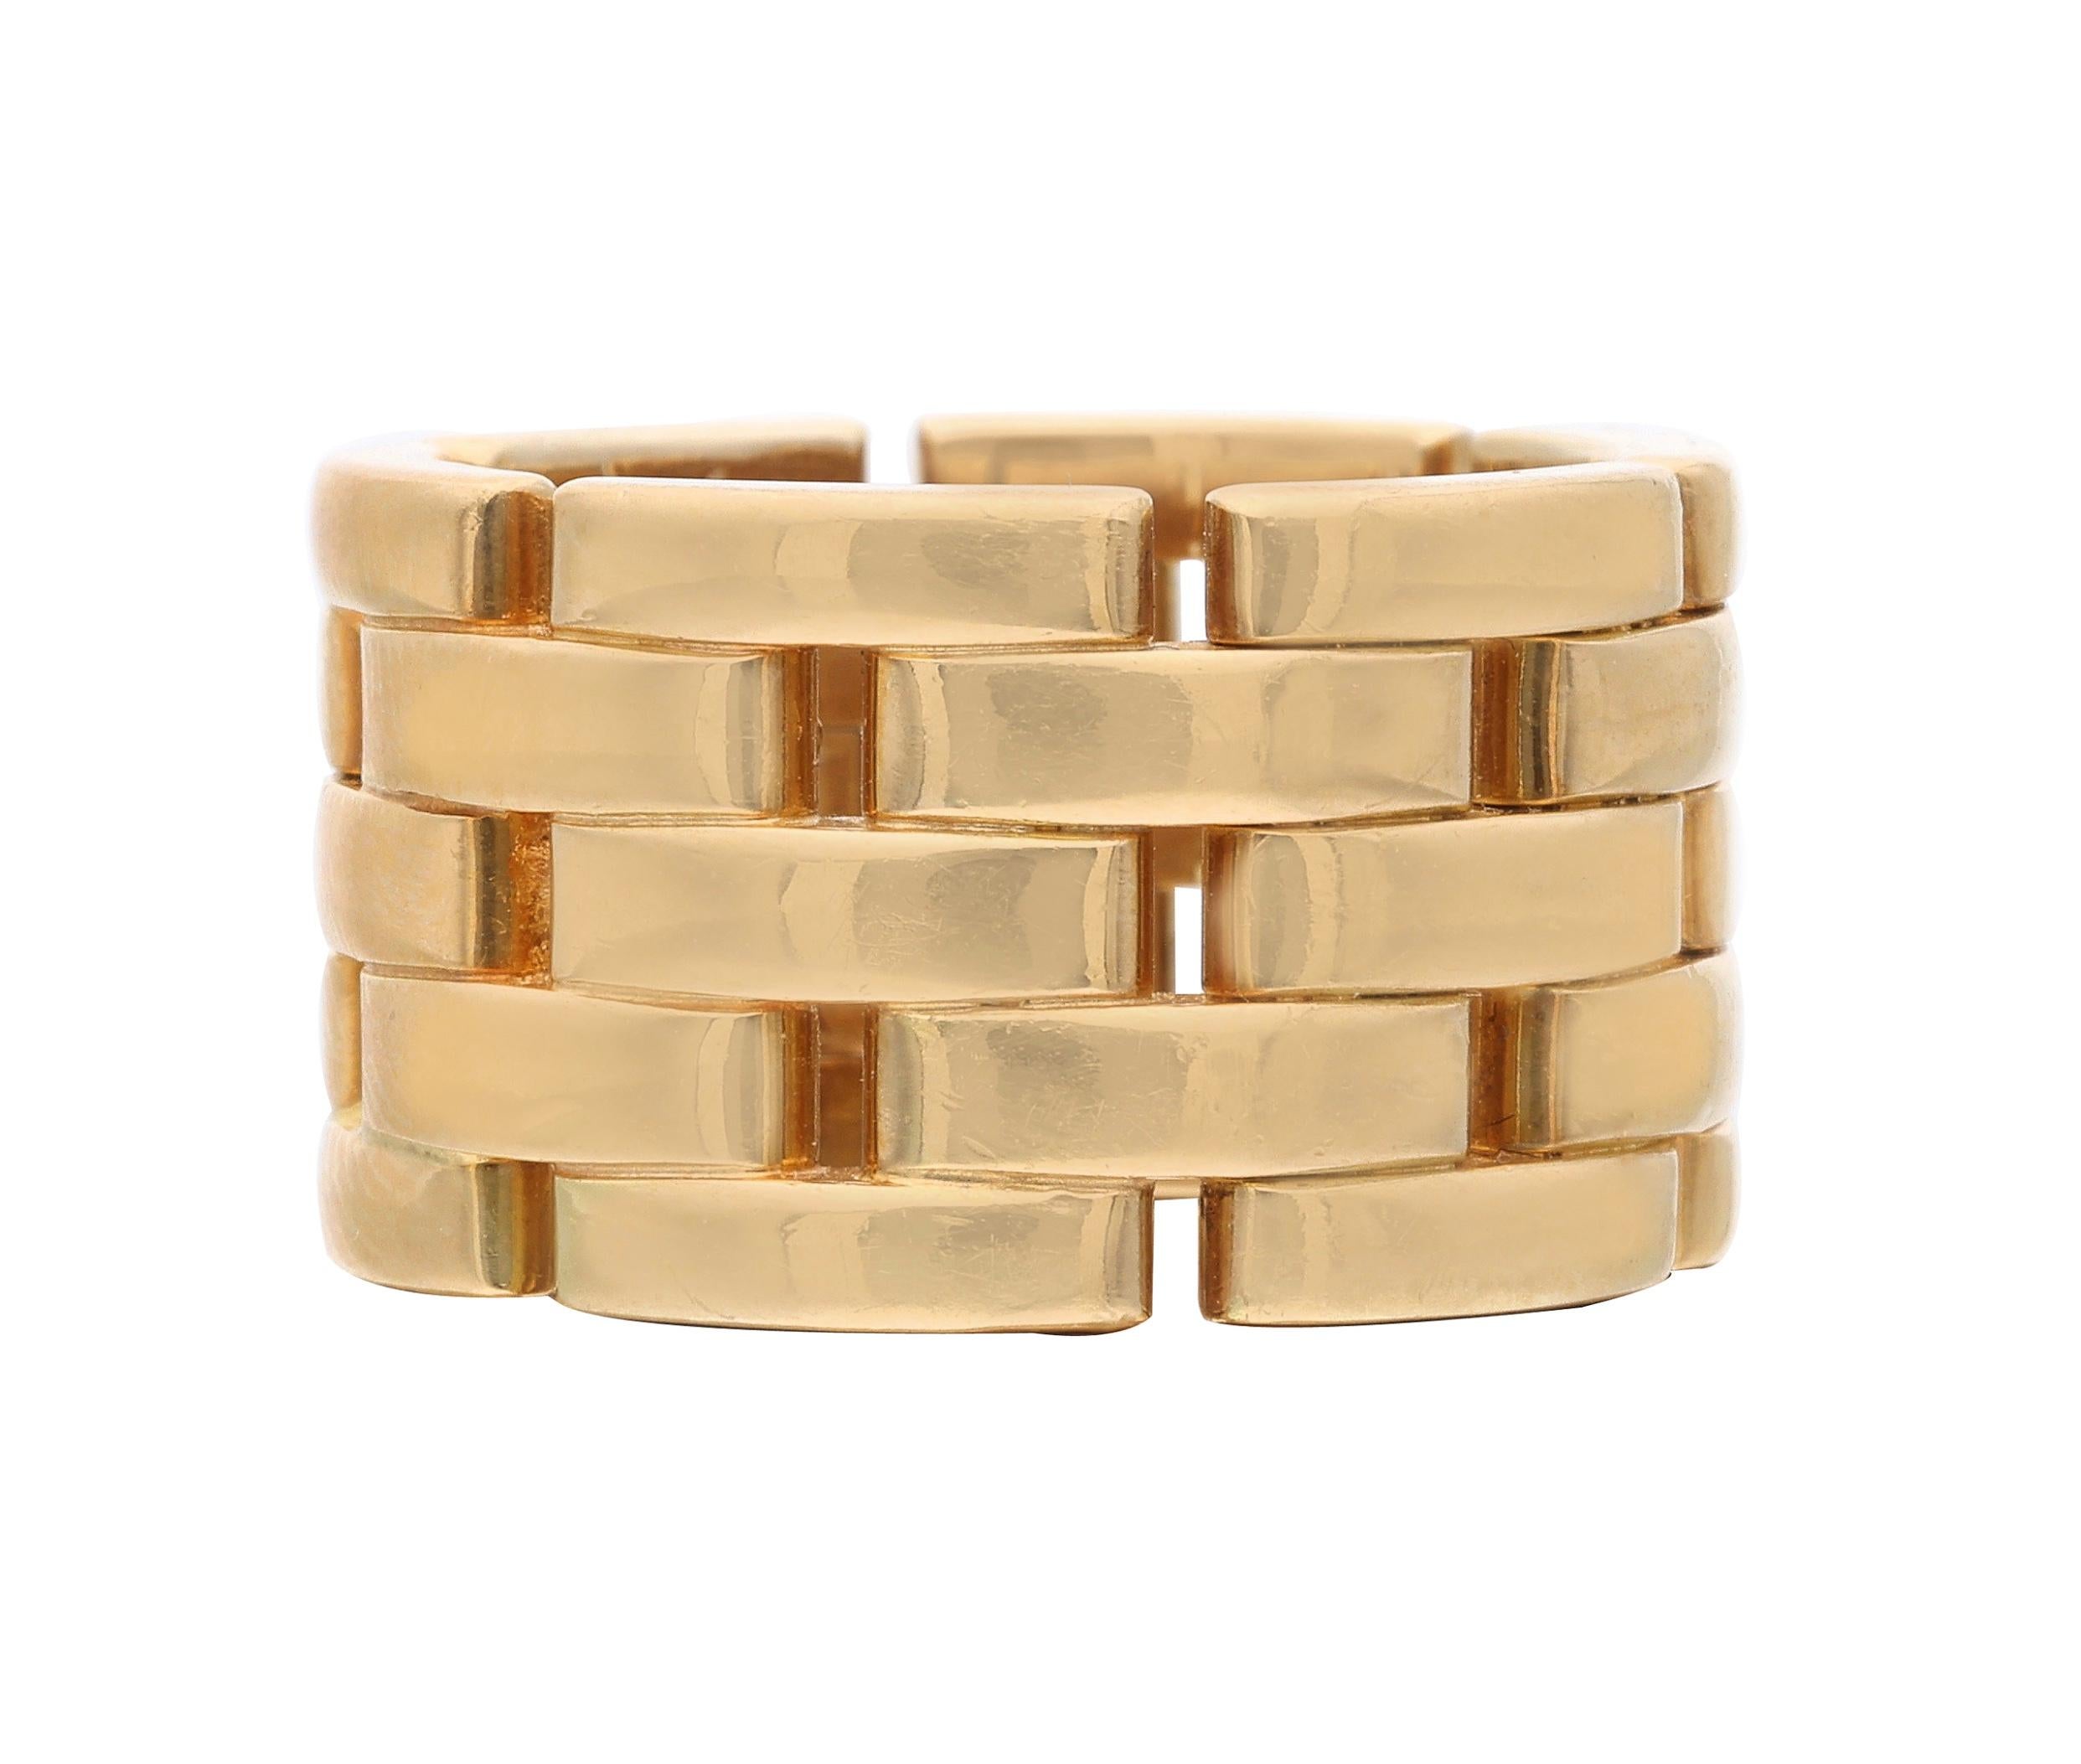 A classic Cartier signature link design.

- 18 karat yellow gold
- Signed Cartier
- Total weight 21.8 grams
- Size 7
- Width 0.5 inch

The condition report is Very Good. 

Perfect for casual settings. 